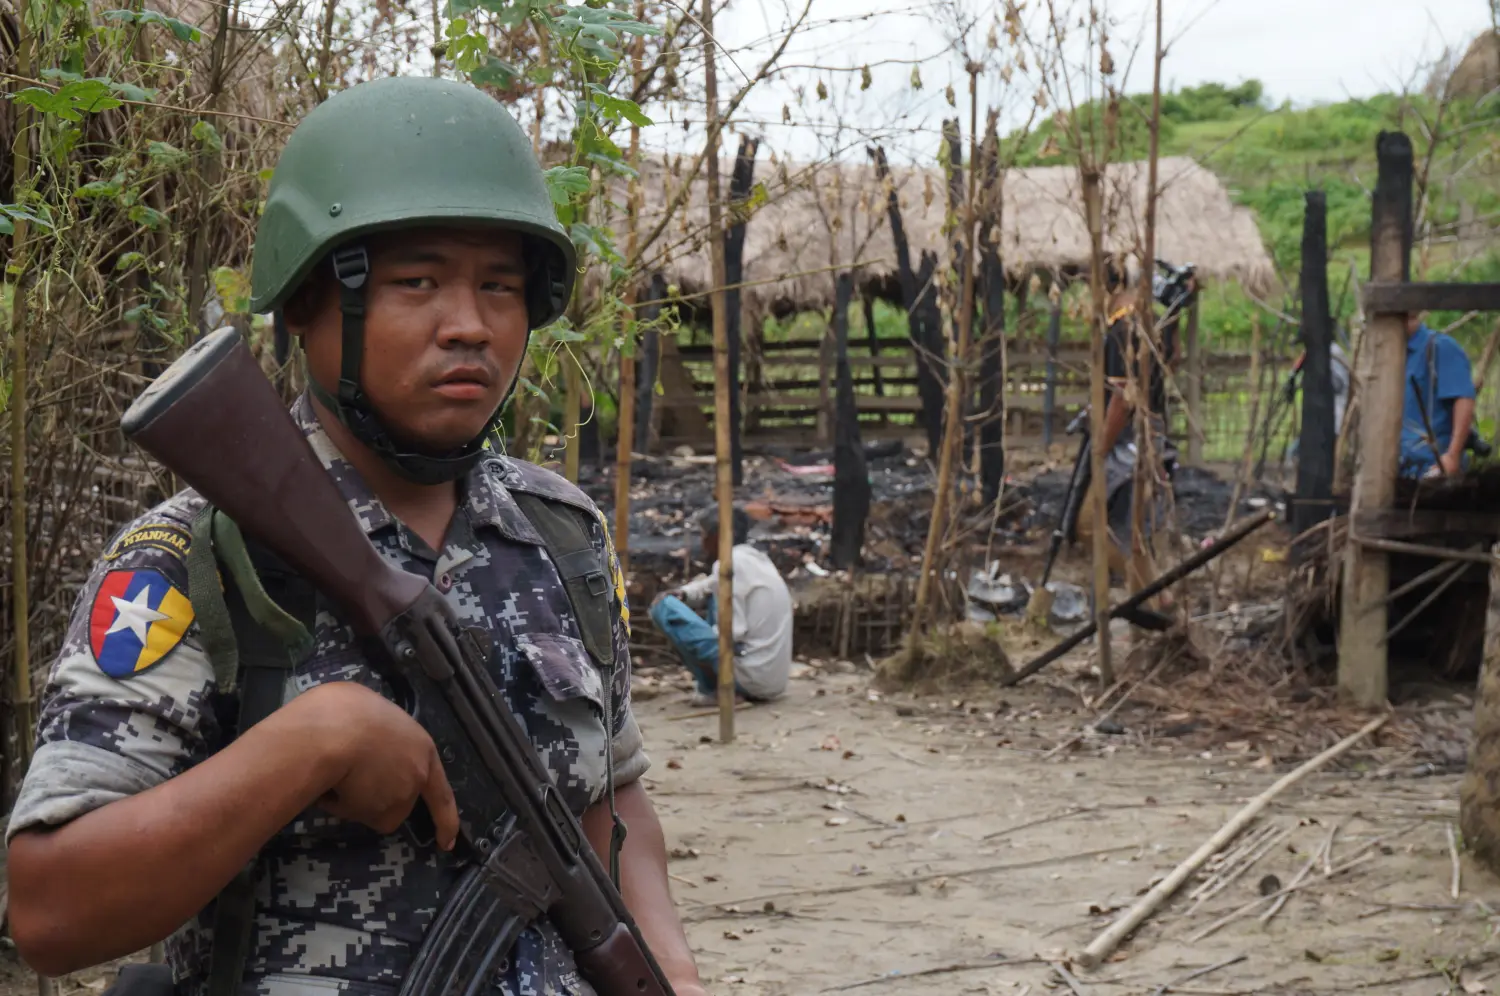 A Myanmar border guard police officer stands guard in front of the remains of a house burned down in a clash between suspected militants and security forces in Tin May village,  Buthidaung township, northern Rakhine state, Myanmar July 14, 2017. Picture taken July 14, 2017. REUTERS/Simon Lewis - RC17166738A0